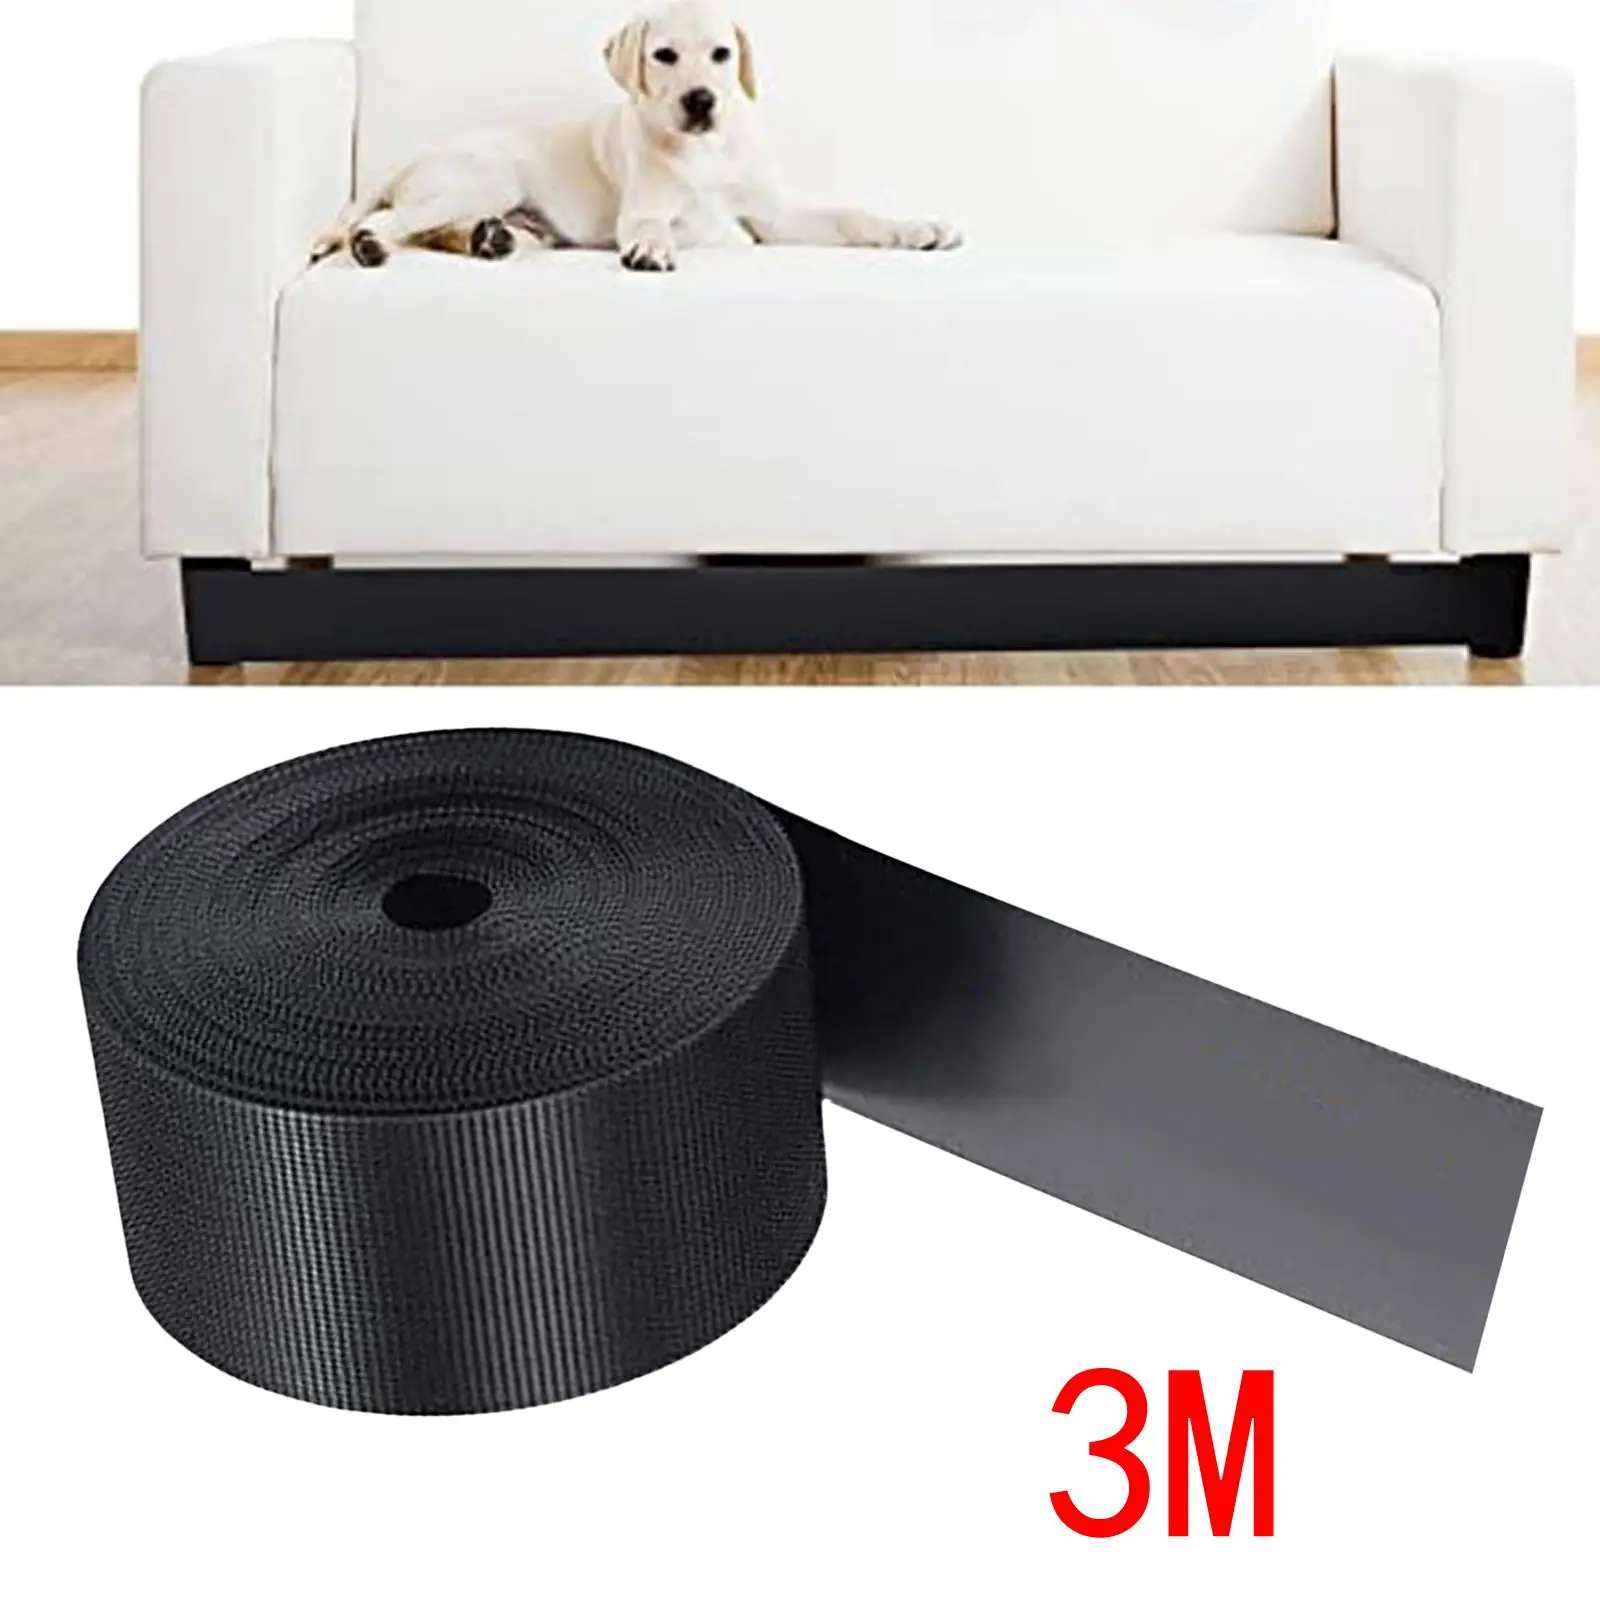 Multipurpose Sofa Toy Baffle Durable Sectional Connector Adjustable Barrier Gap Baffle for Living Room Bedroom Sofa Bed